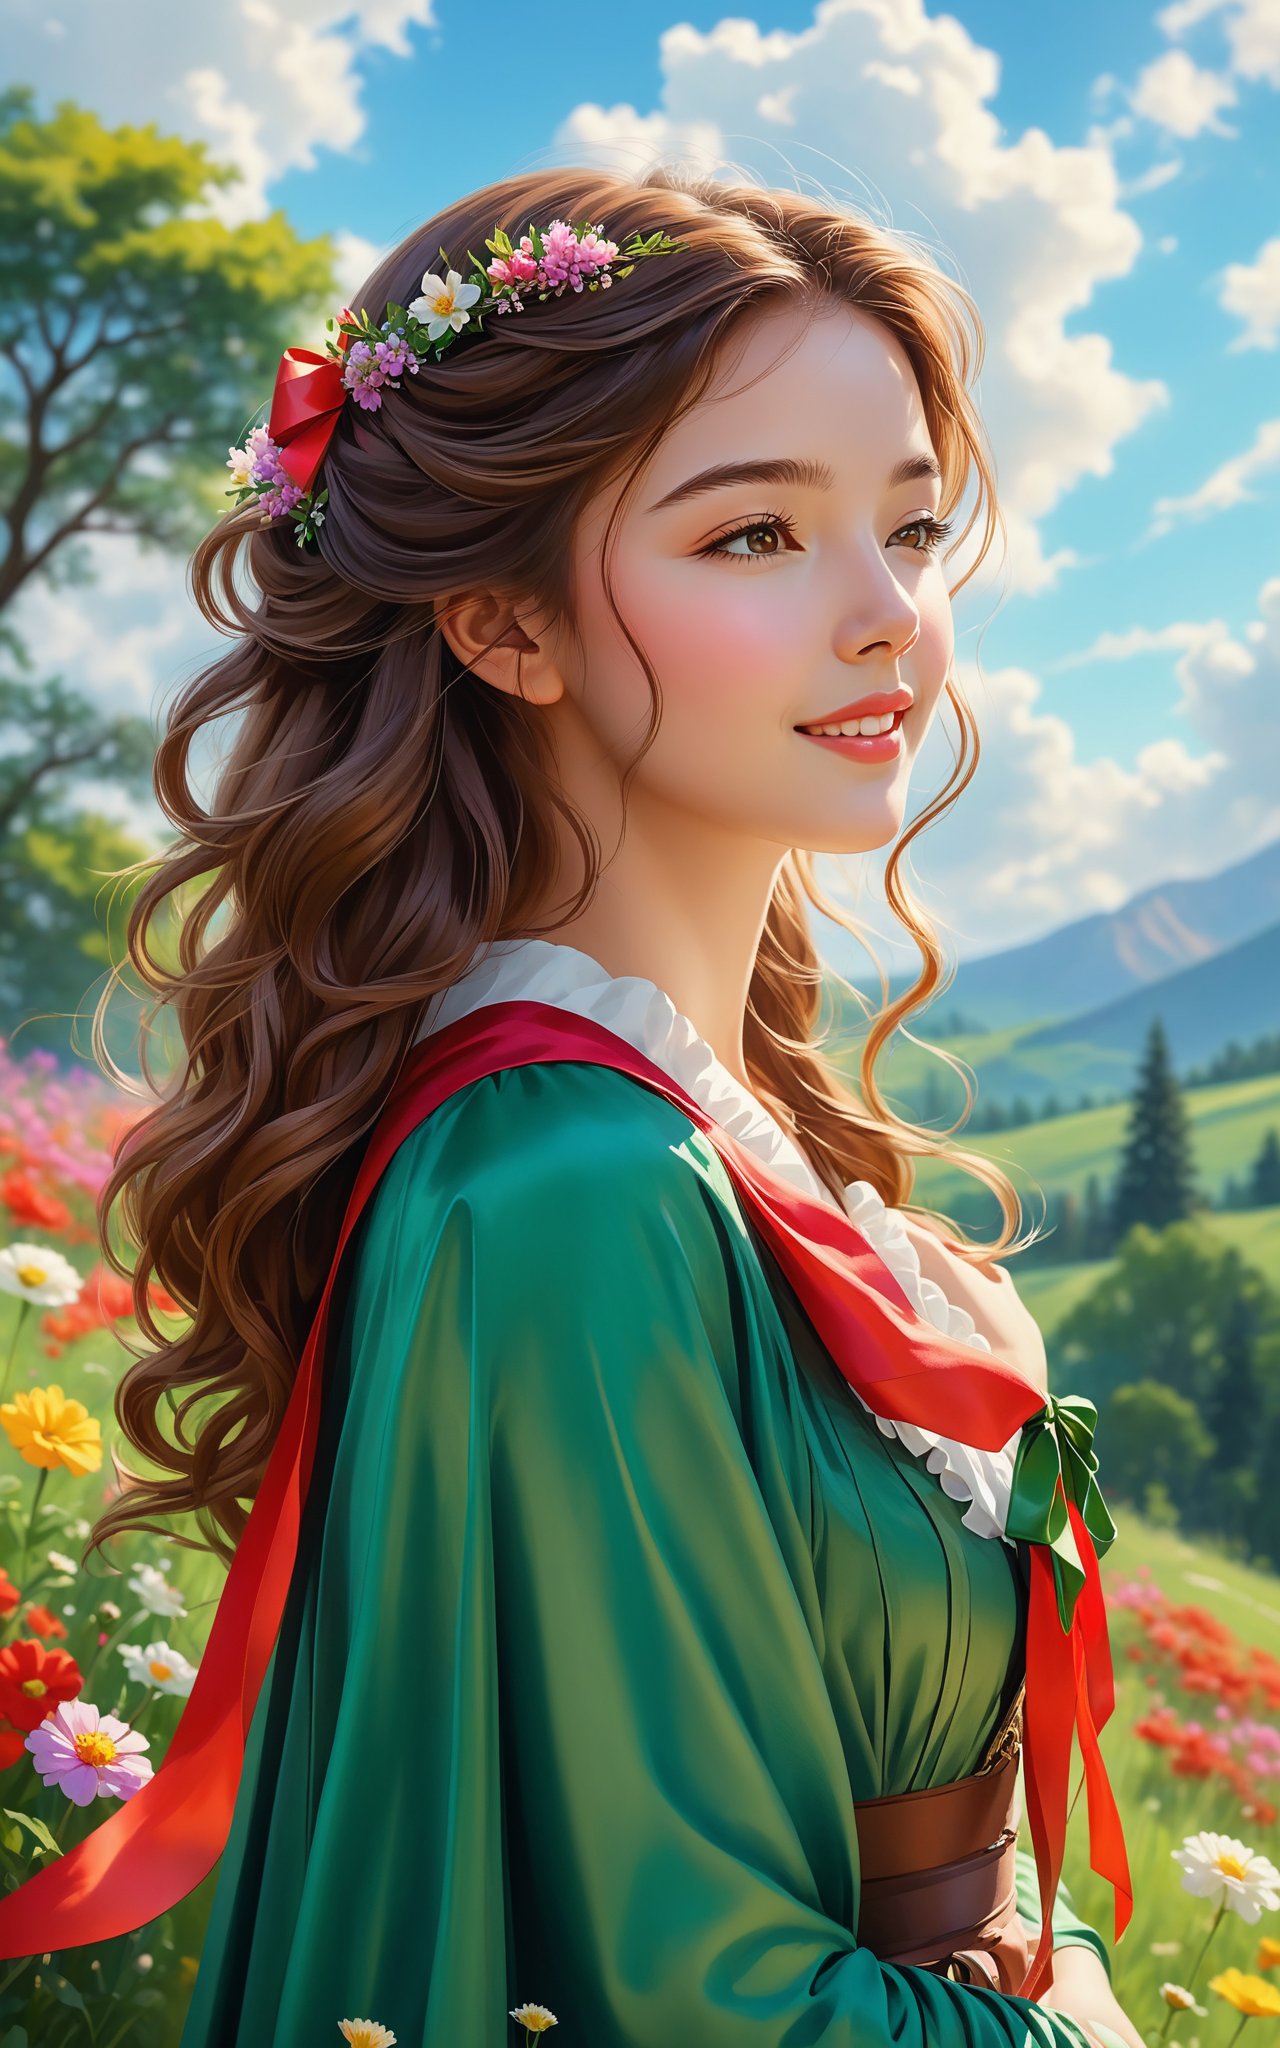 score_9, score_8_up, score_7_up, the image showcases a beautiful female character, set against a picturesque landscape. warm smile, she has long, wavy brown hair and is adorned in a green dress with a matching cape. she wears a large, red ribbon. the character appears to be in a contemplative or relaxed state, with her eyes closed and a serene expression on her face. the background is a lush green meadow surrounded by trees and colorful flowers. the sky is clear with a few fluffy clouds, and the overall ambiance of the image is calm and peaceful, realistic

, Expressiveh,concept art,impressionist painting